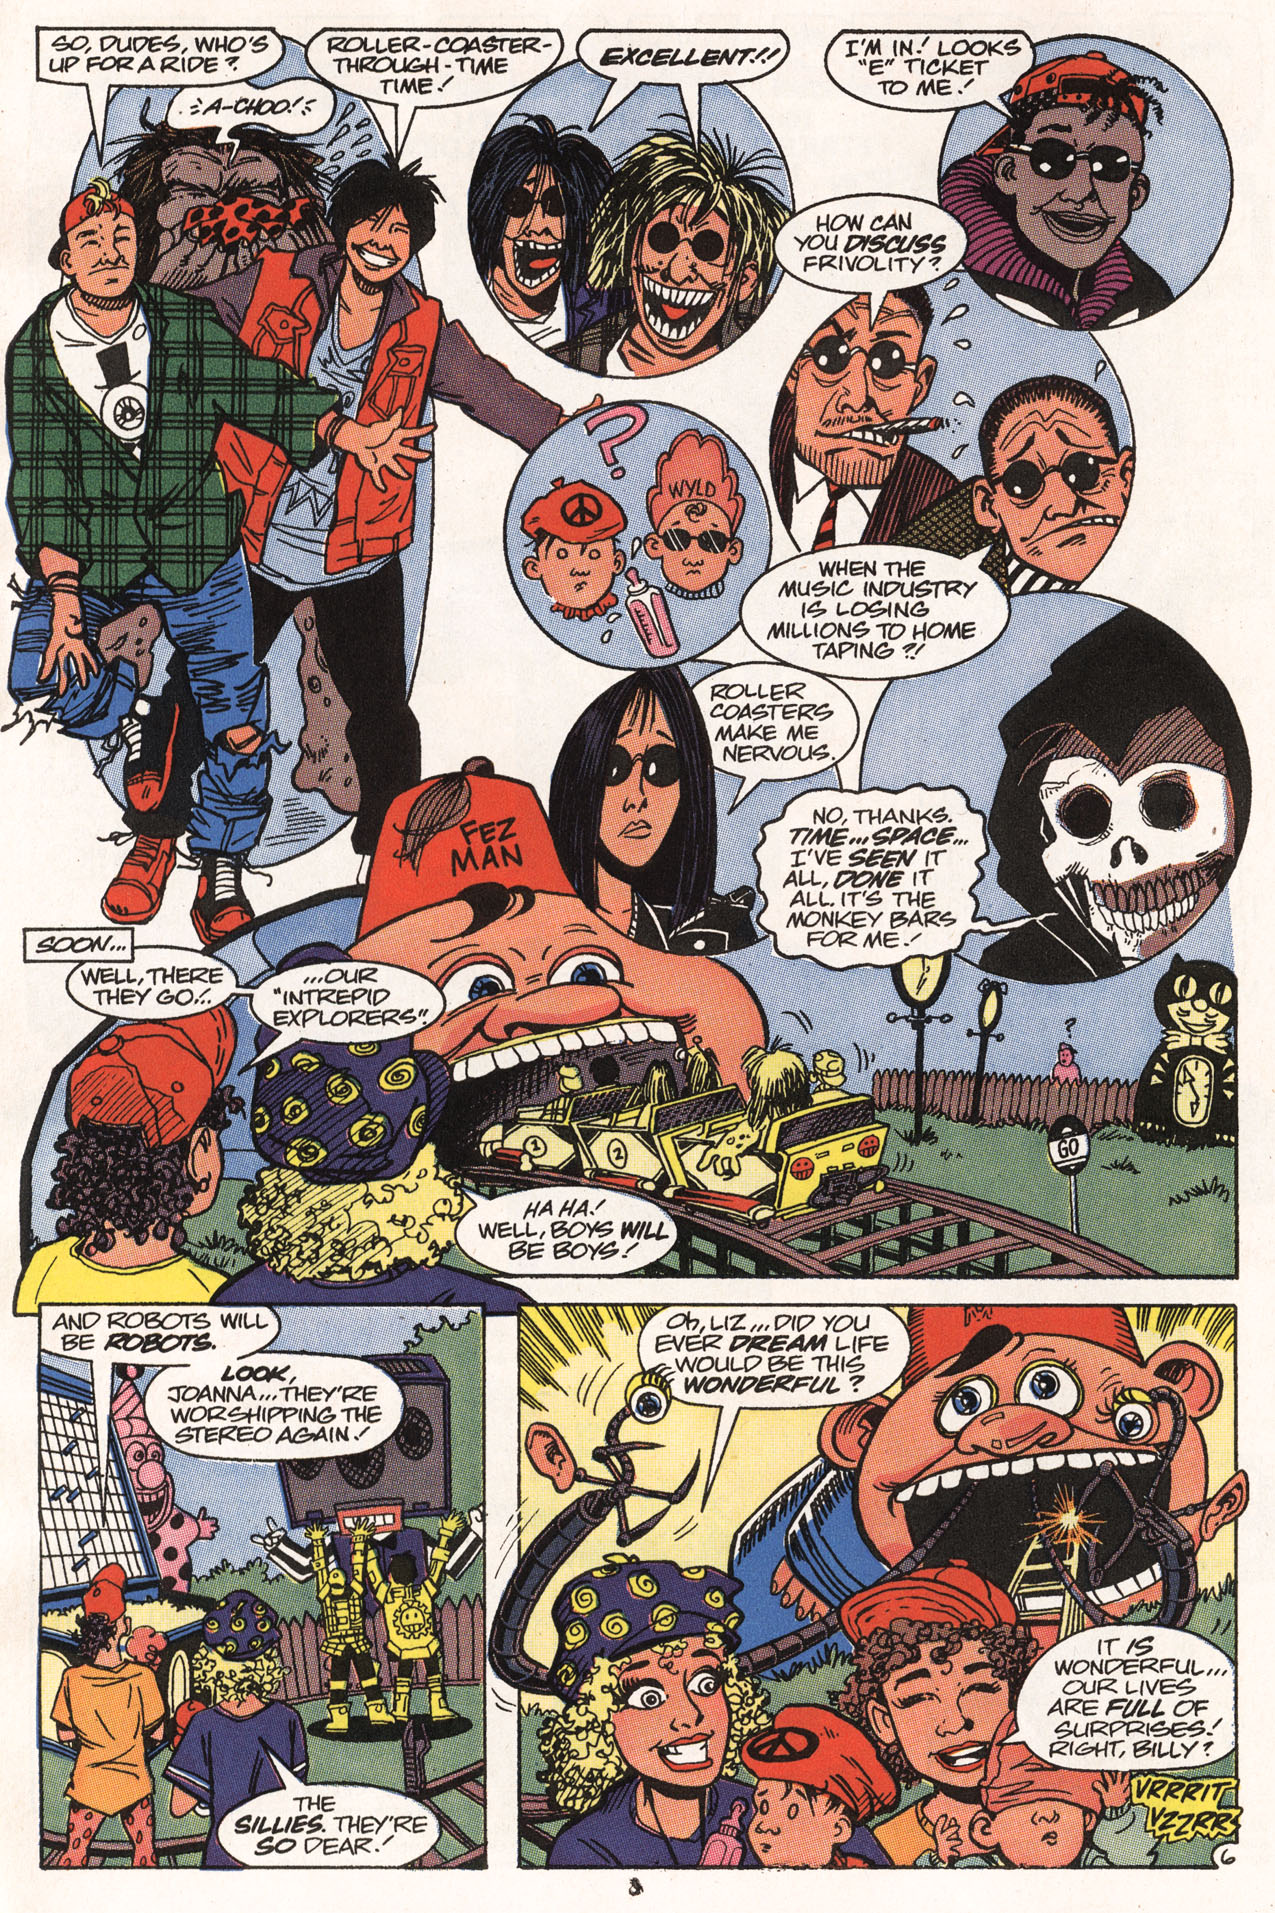 Read online Bill & Ted's Excellent Comic Book comic -  Issue #4 - 9